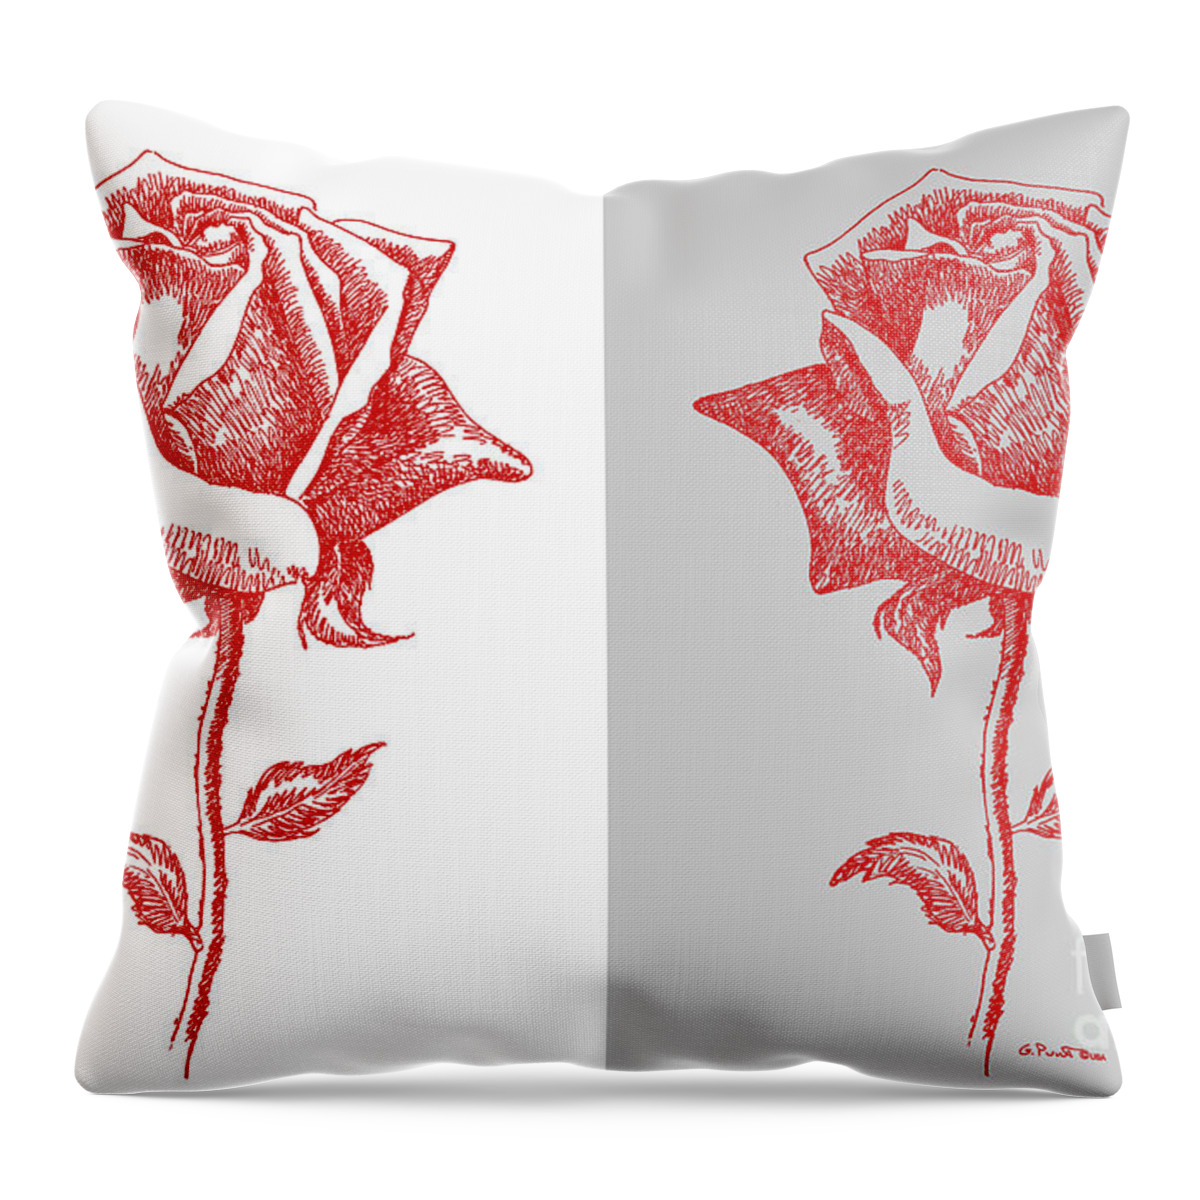 Black Throw Pillow featuring the painting 2 Red Roses Poster by Gordon Punt